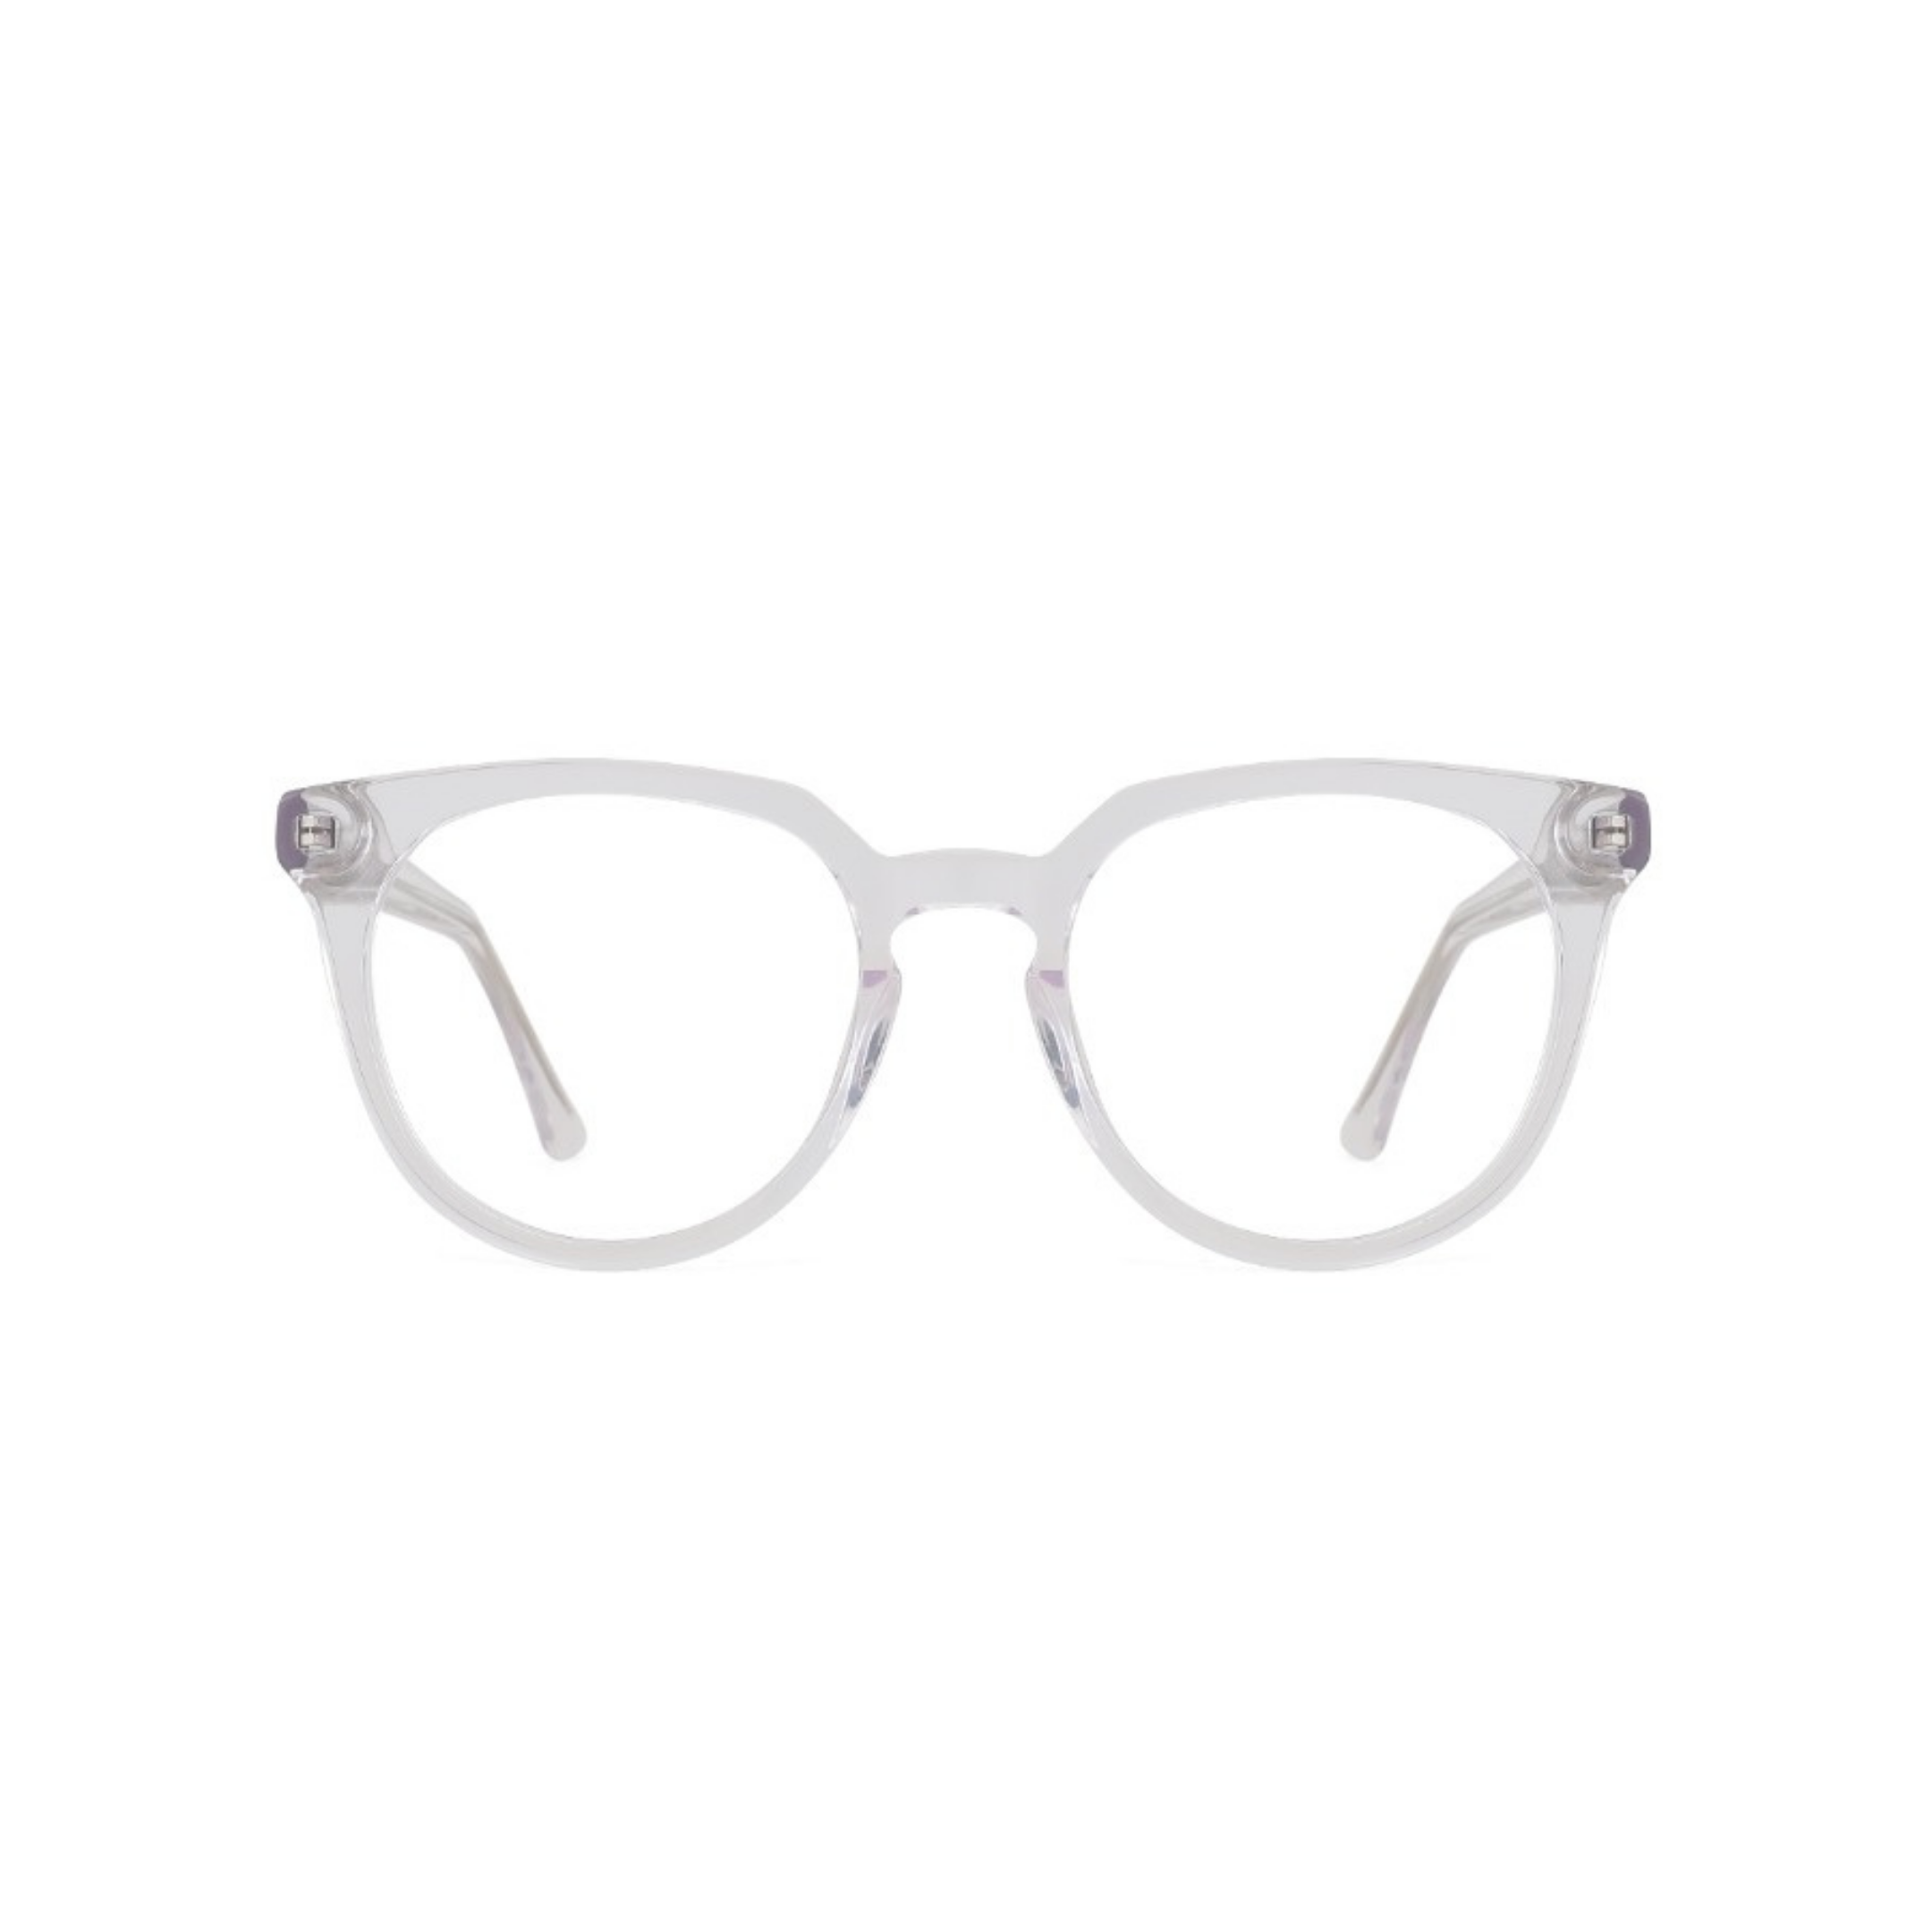 The Claire - Blue light blocking glasses